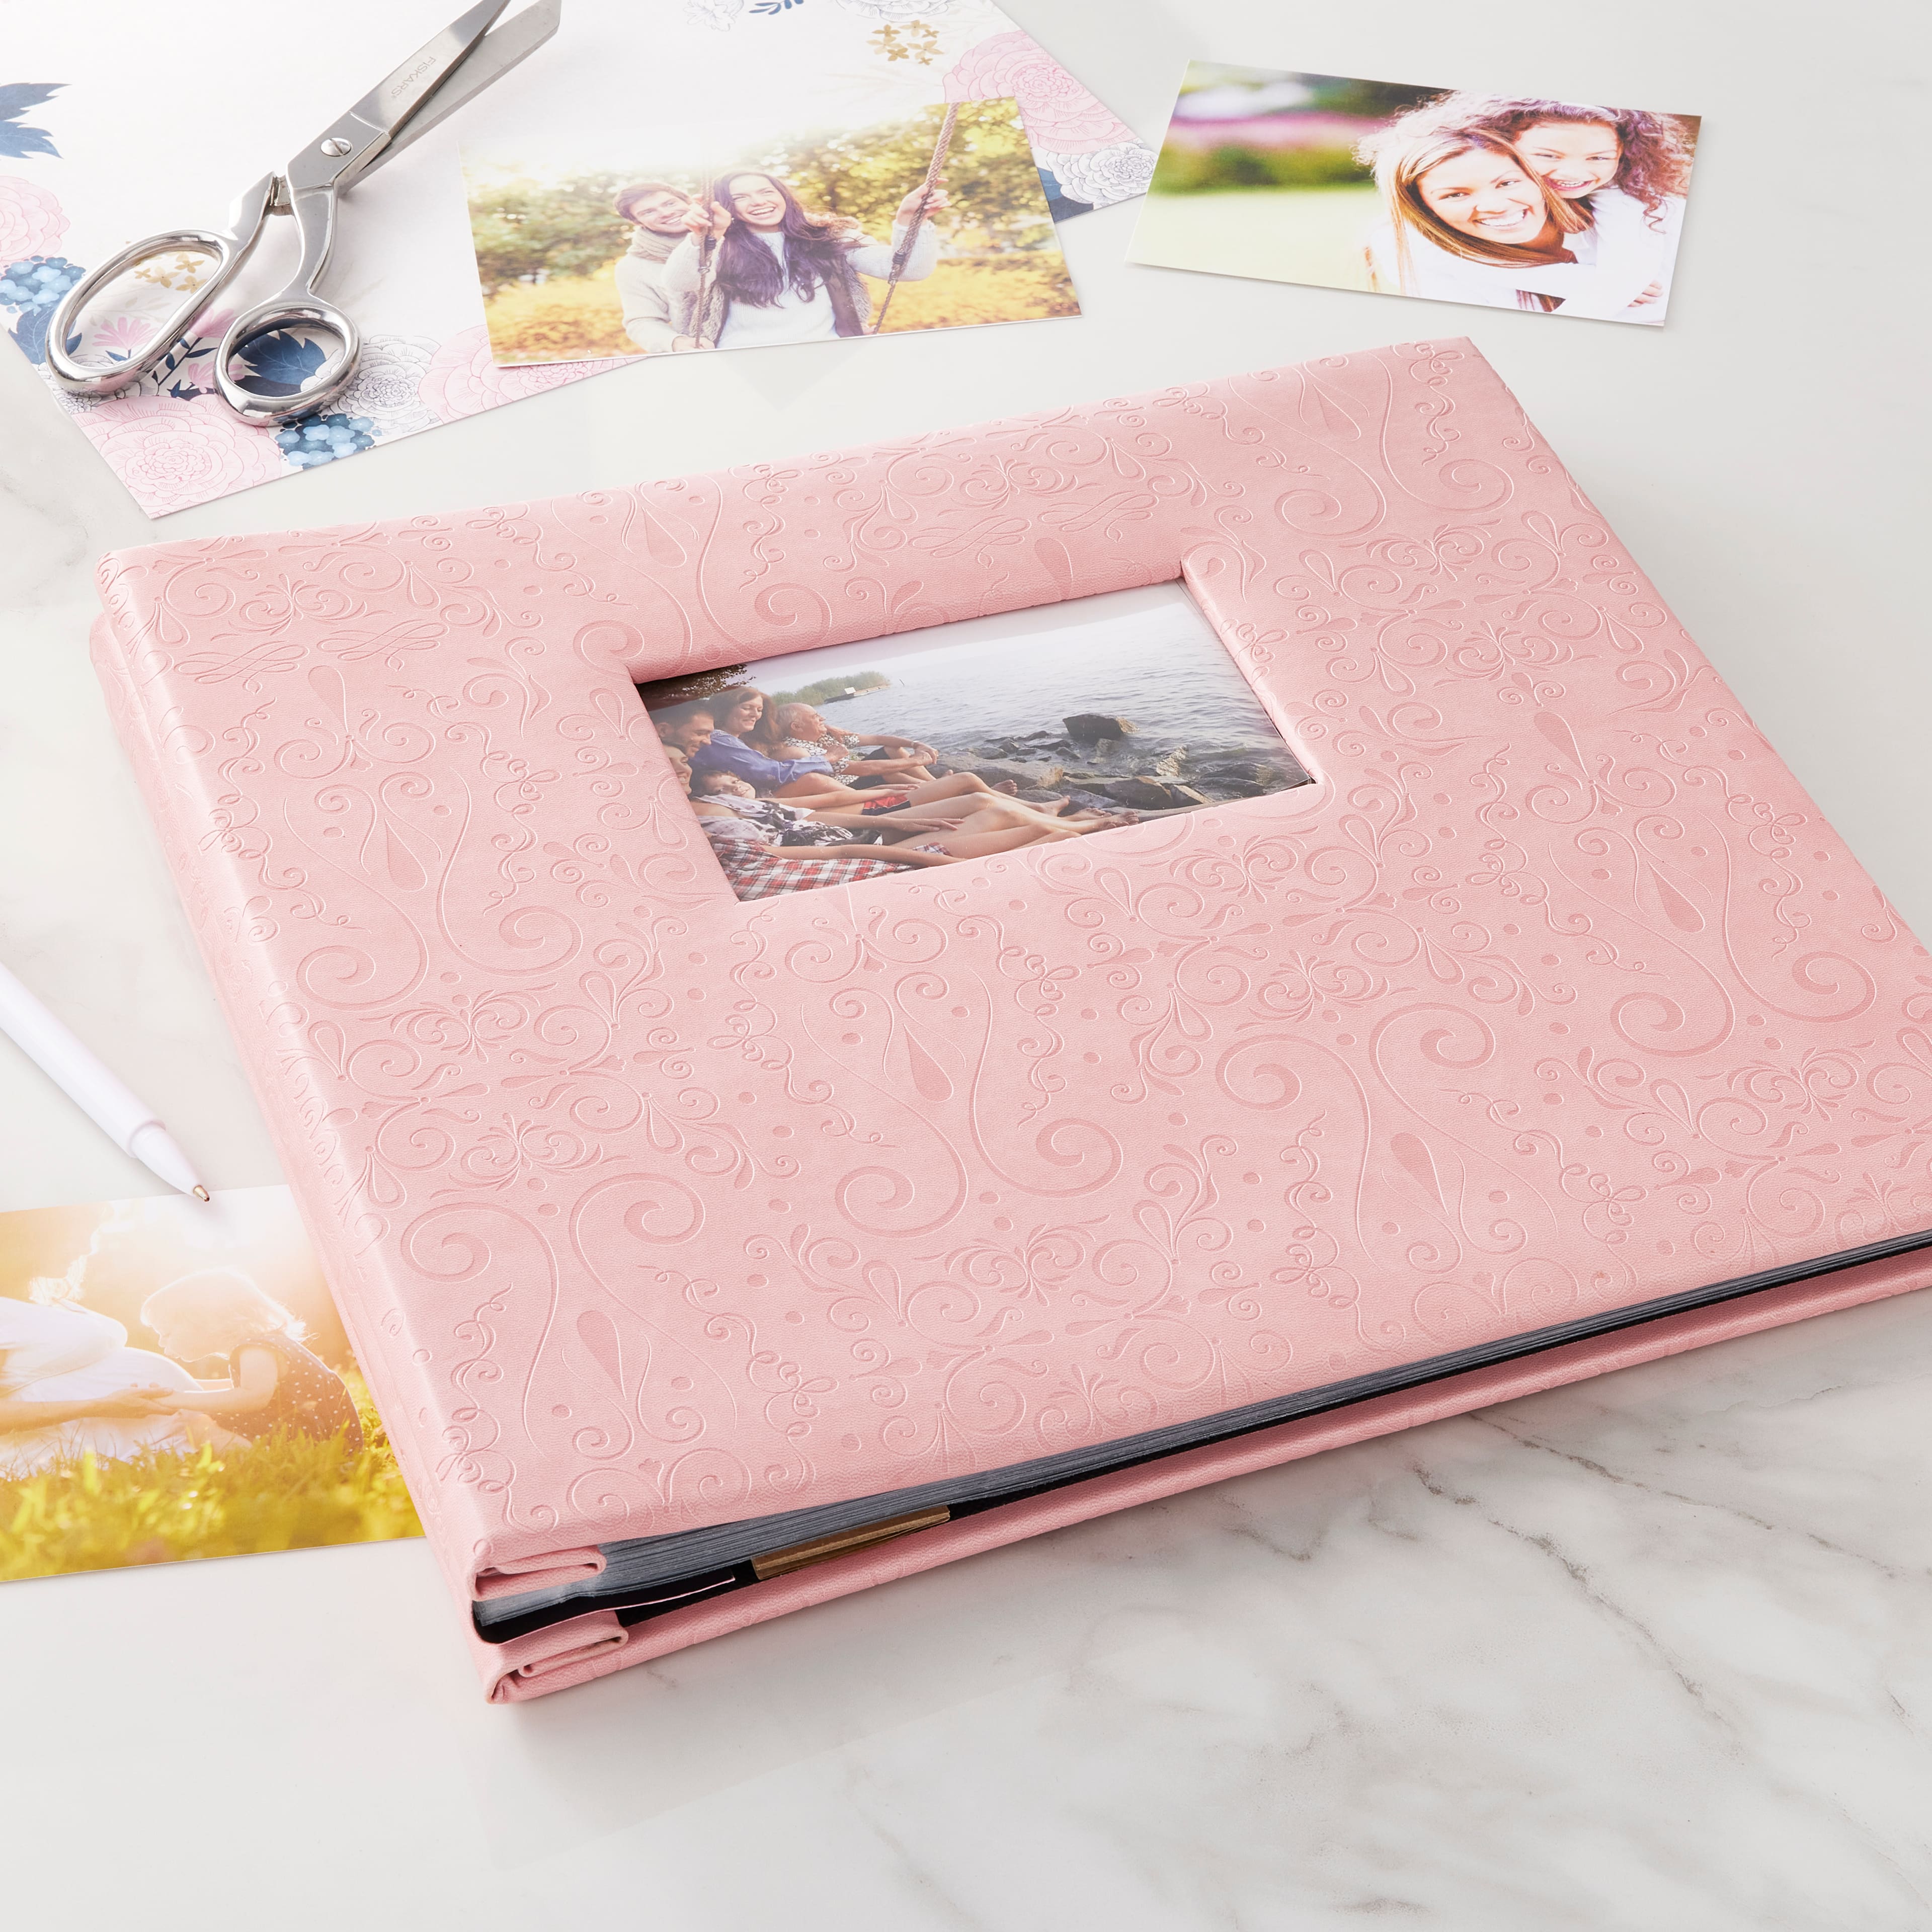 Shop for the Pink Mega Scrapbook Album by Recollections® at Michaels